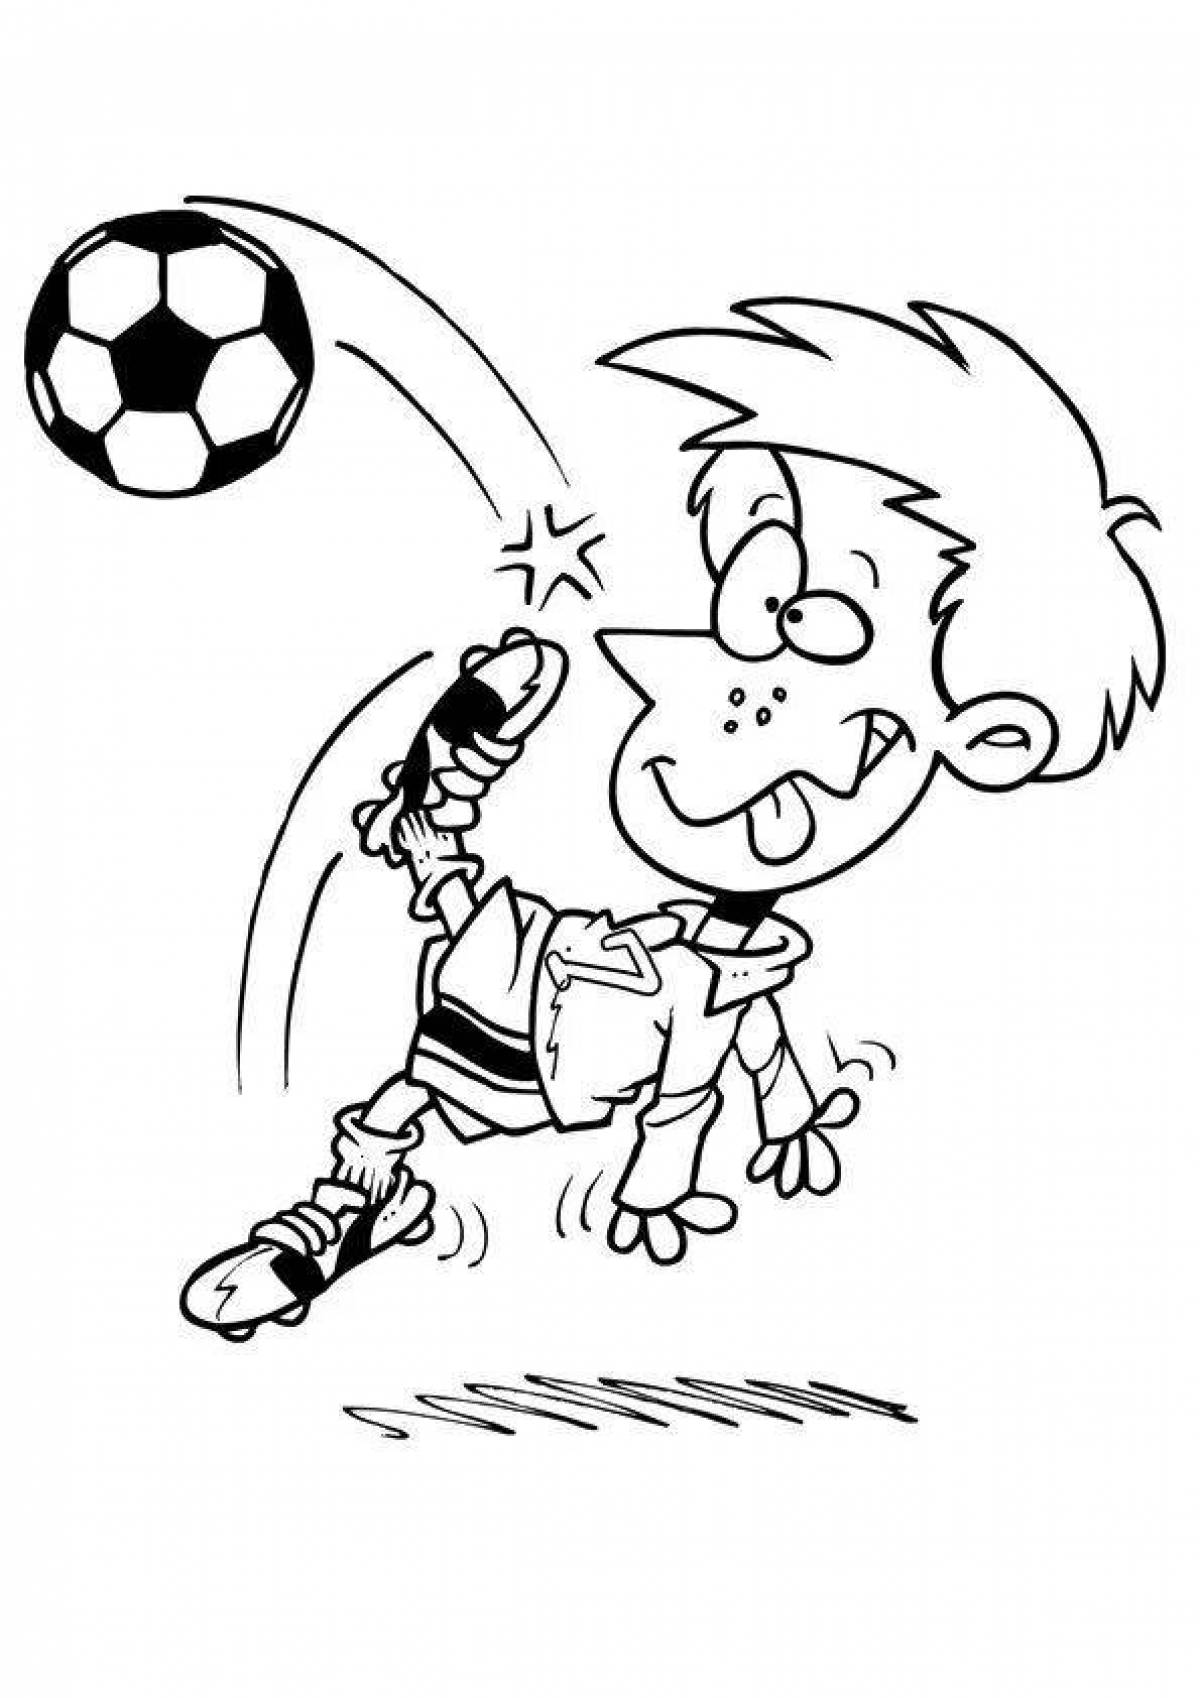 Coloring page dazzling football player for kids